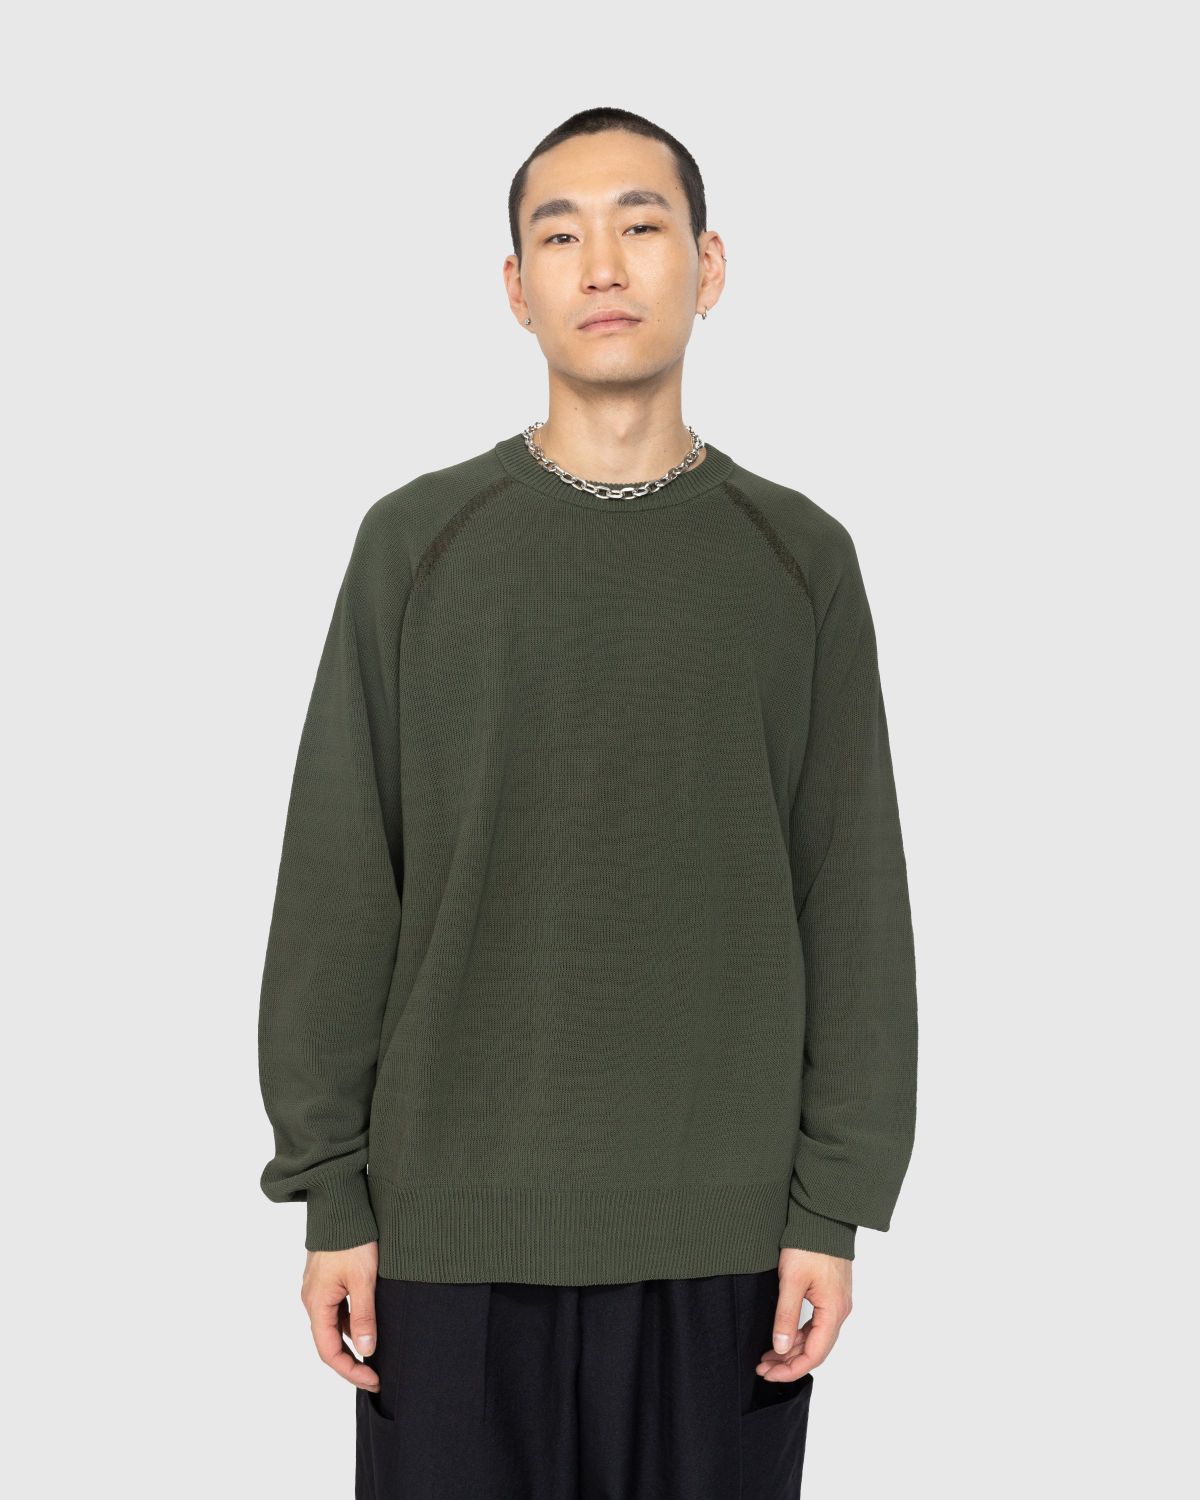 Y-3 – CL Knitted CR Sweater - Knitwear - Green - Image 2